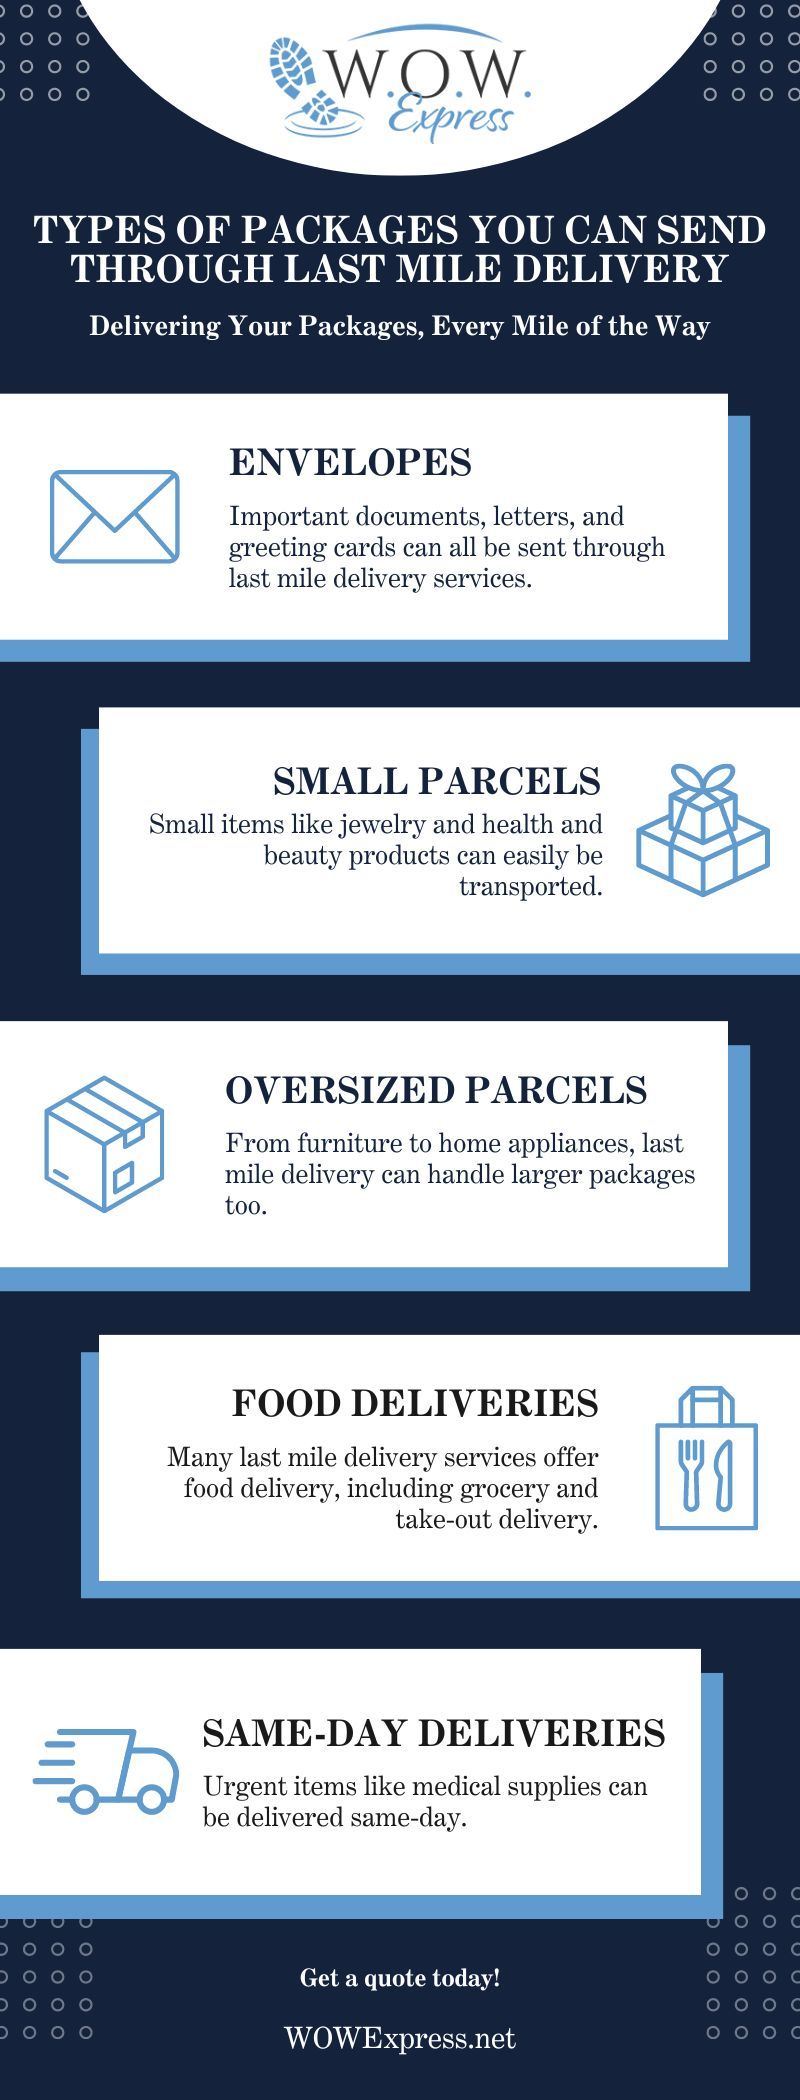 Types of Packages You Can Sent Through Last Mile Delivery infographic